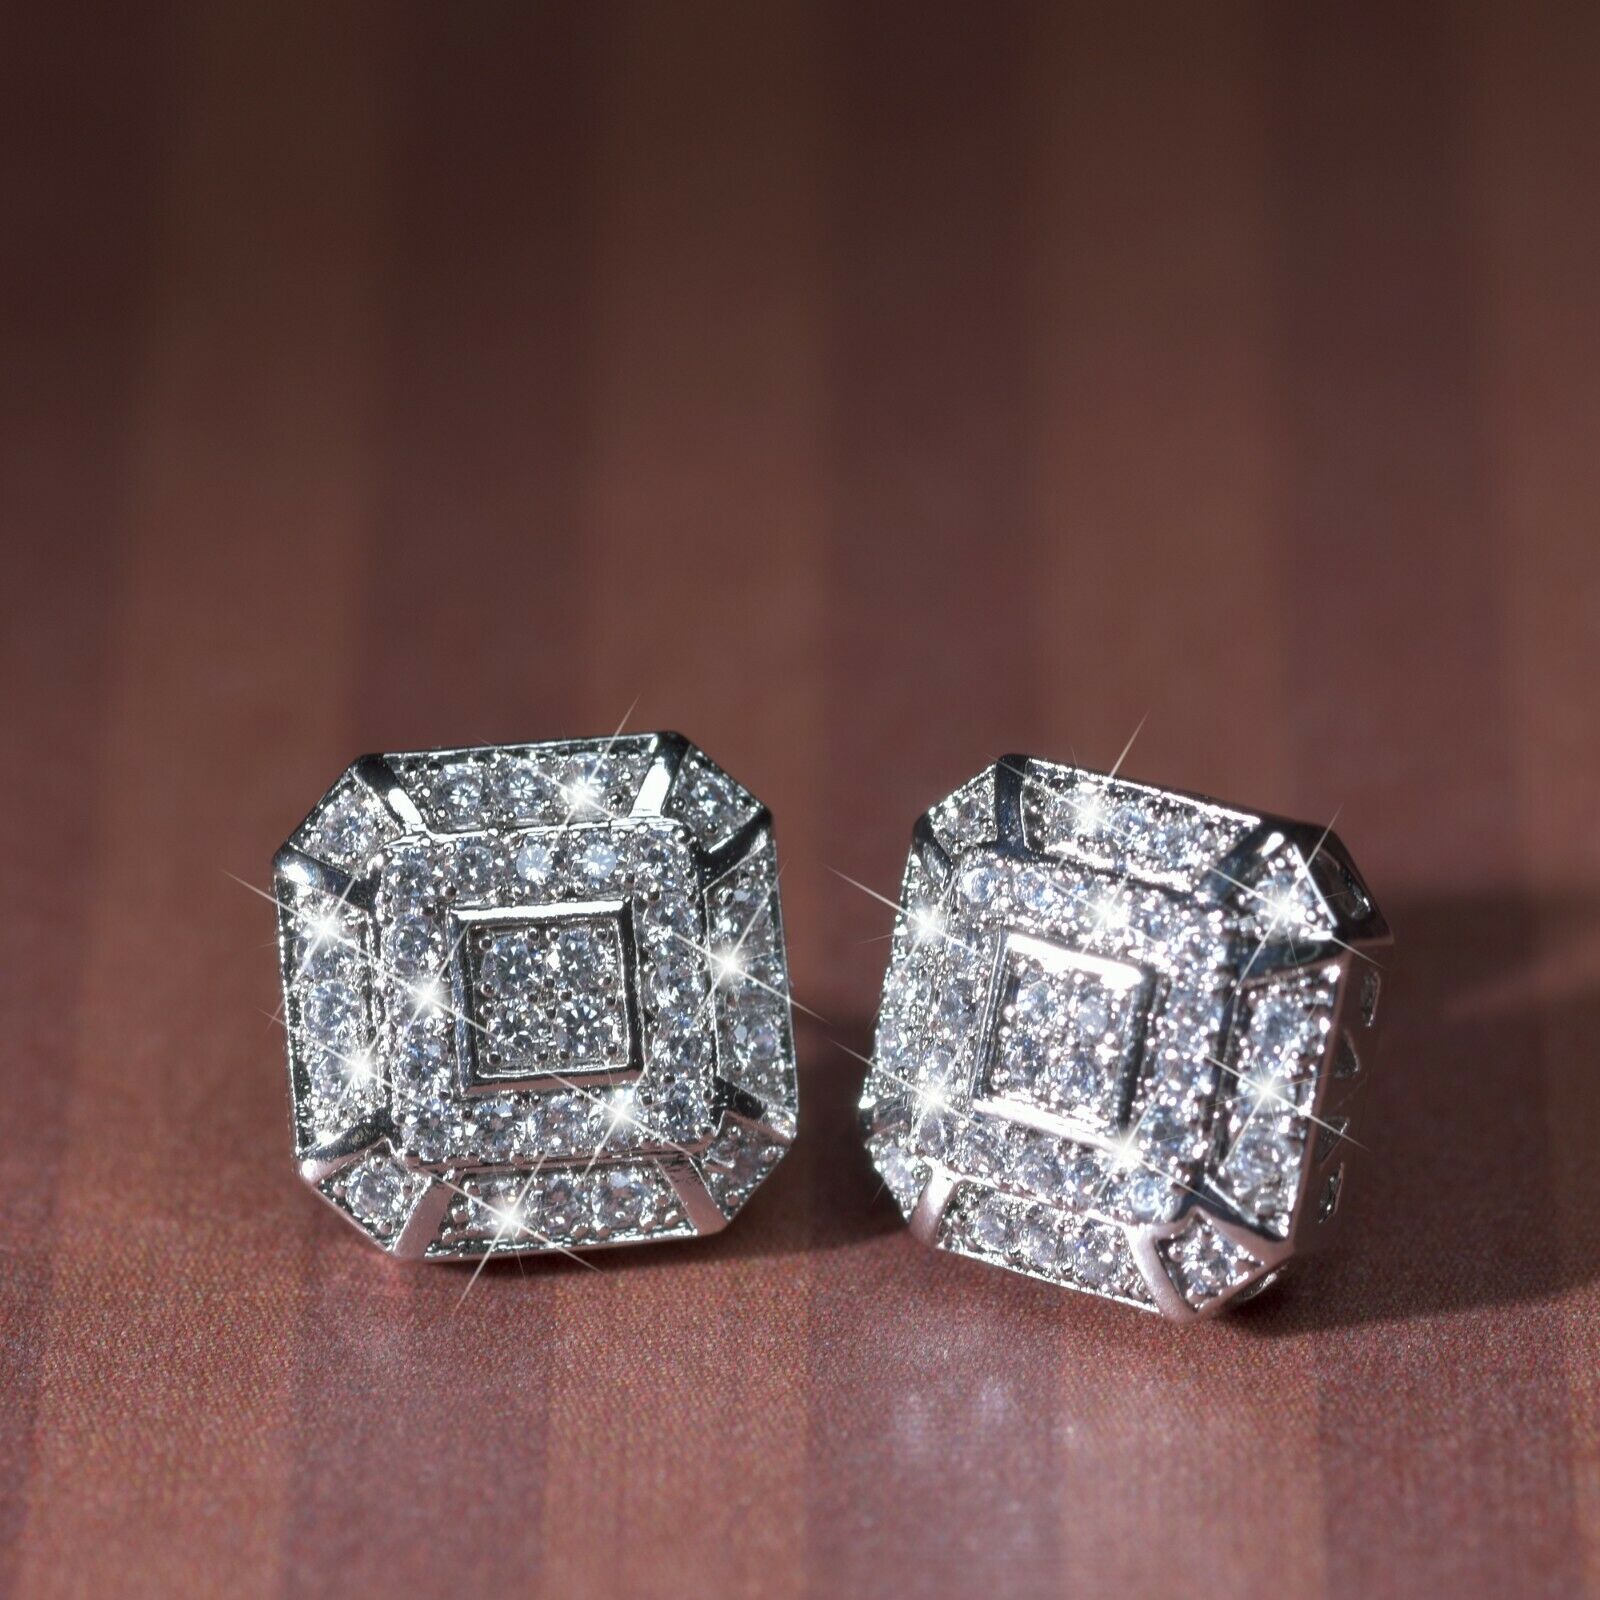 18k white gold filled stud made with Swarovski crystal square luxury earrings